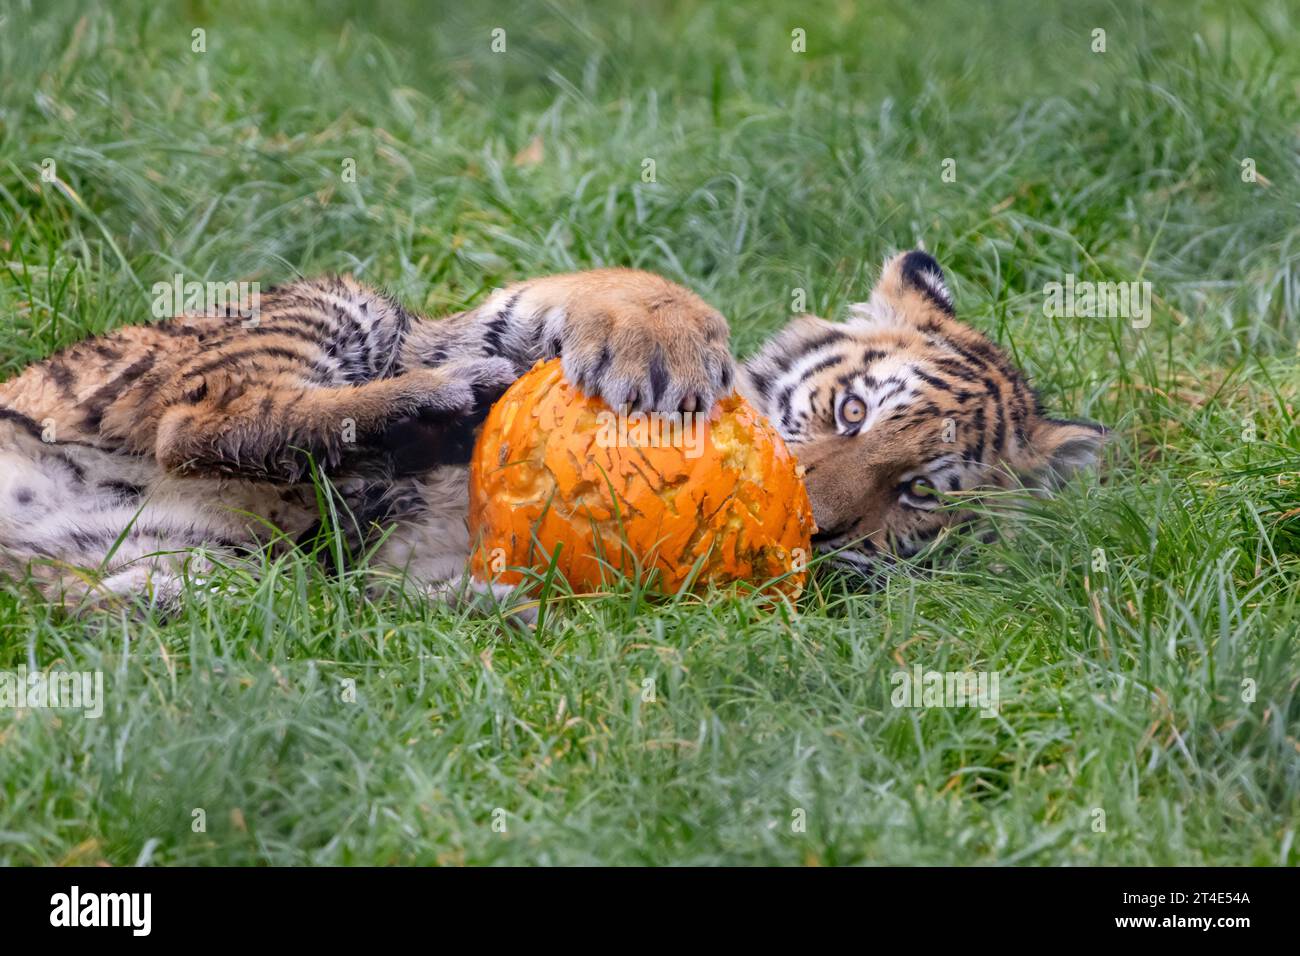 Kash grapples with his pumpkin BANHAM ZOO, NORFOLK, ENGLAND ADORABLE IMAGES of a five month old tiger cub playing with pumpkins have been captured on Stock Photo